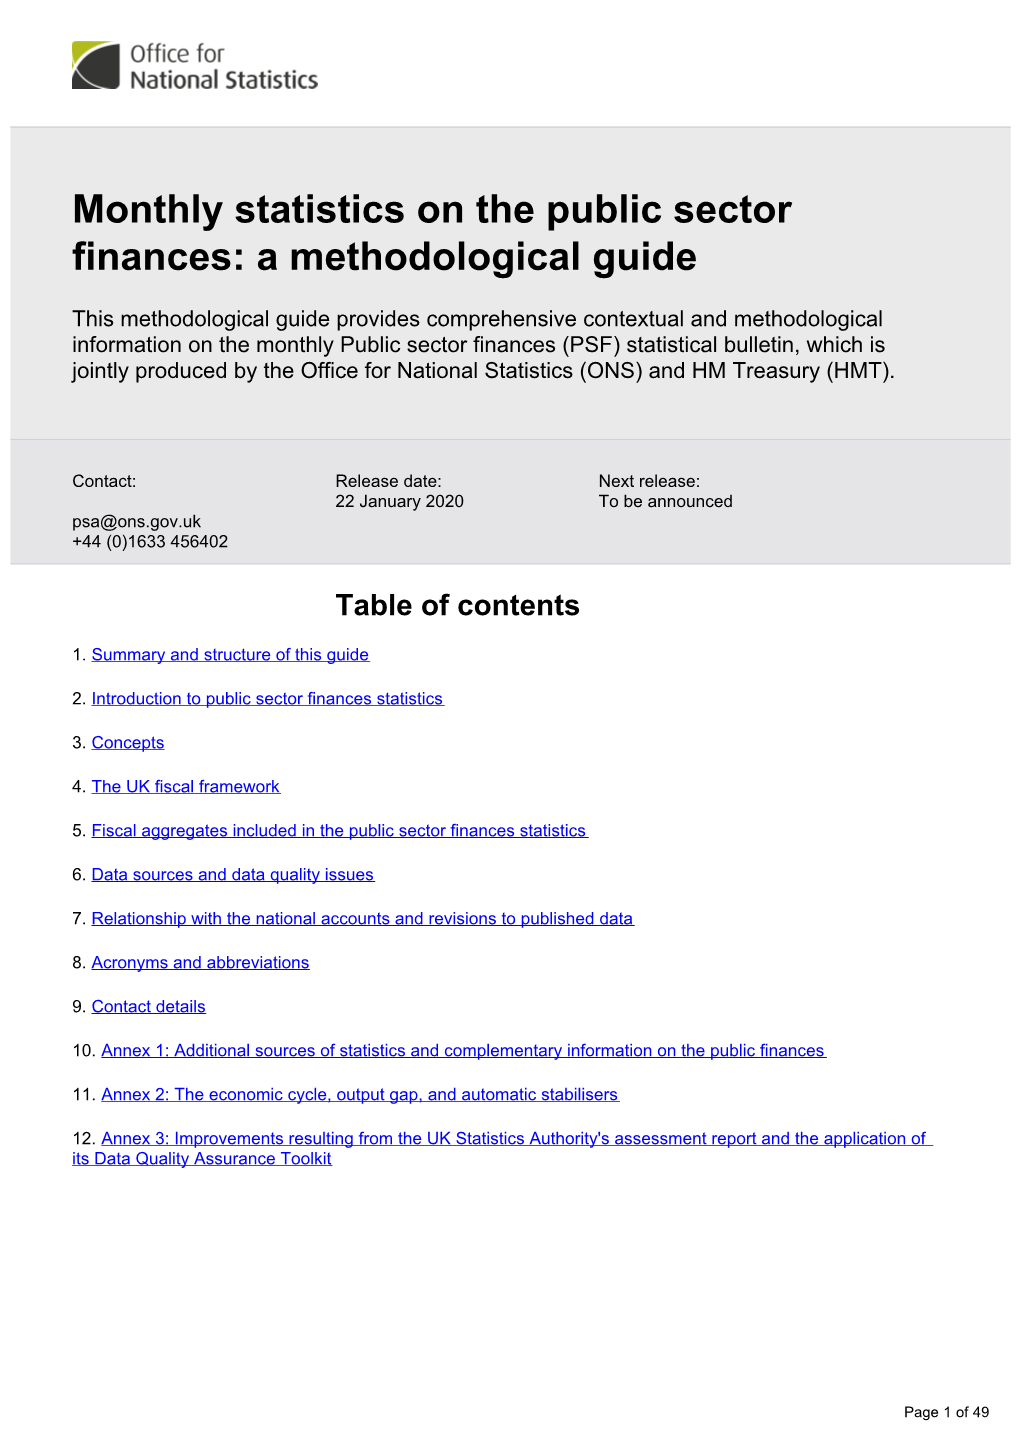 Monthly Statistics on the Public Sector Finances: a Methodological Guide